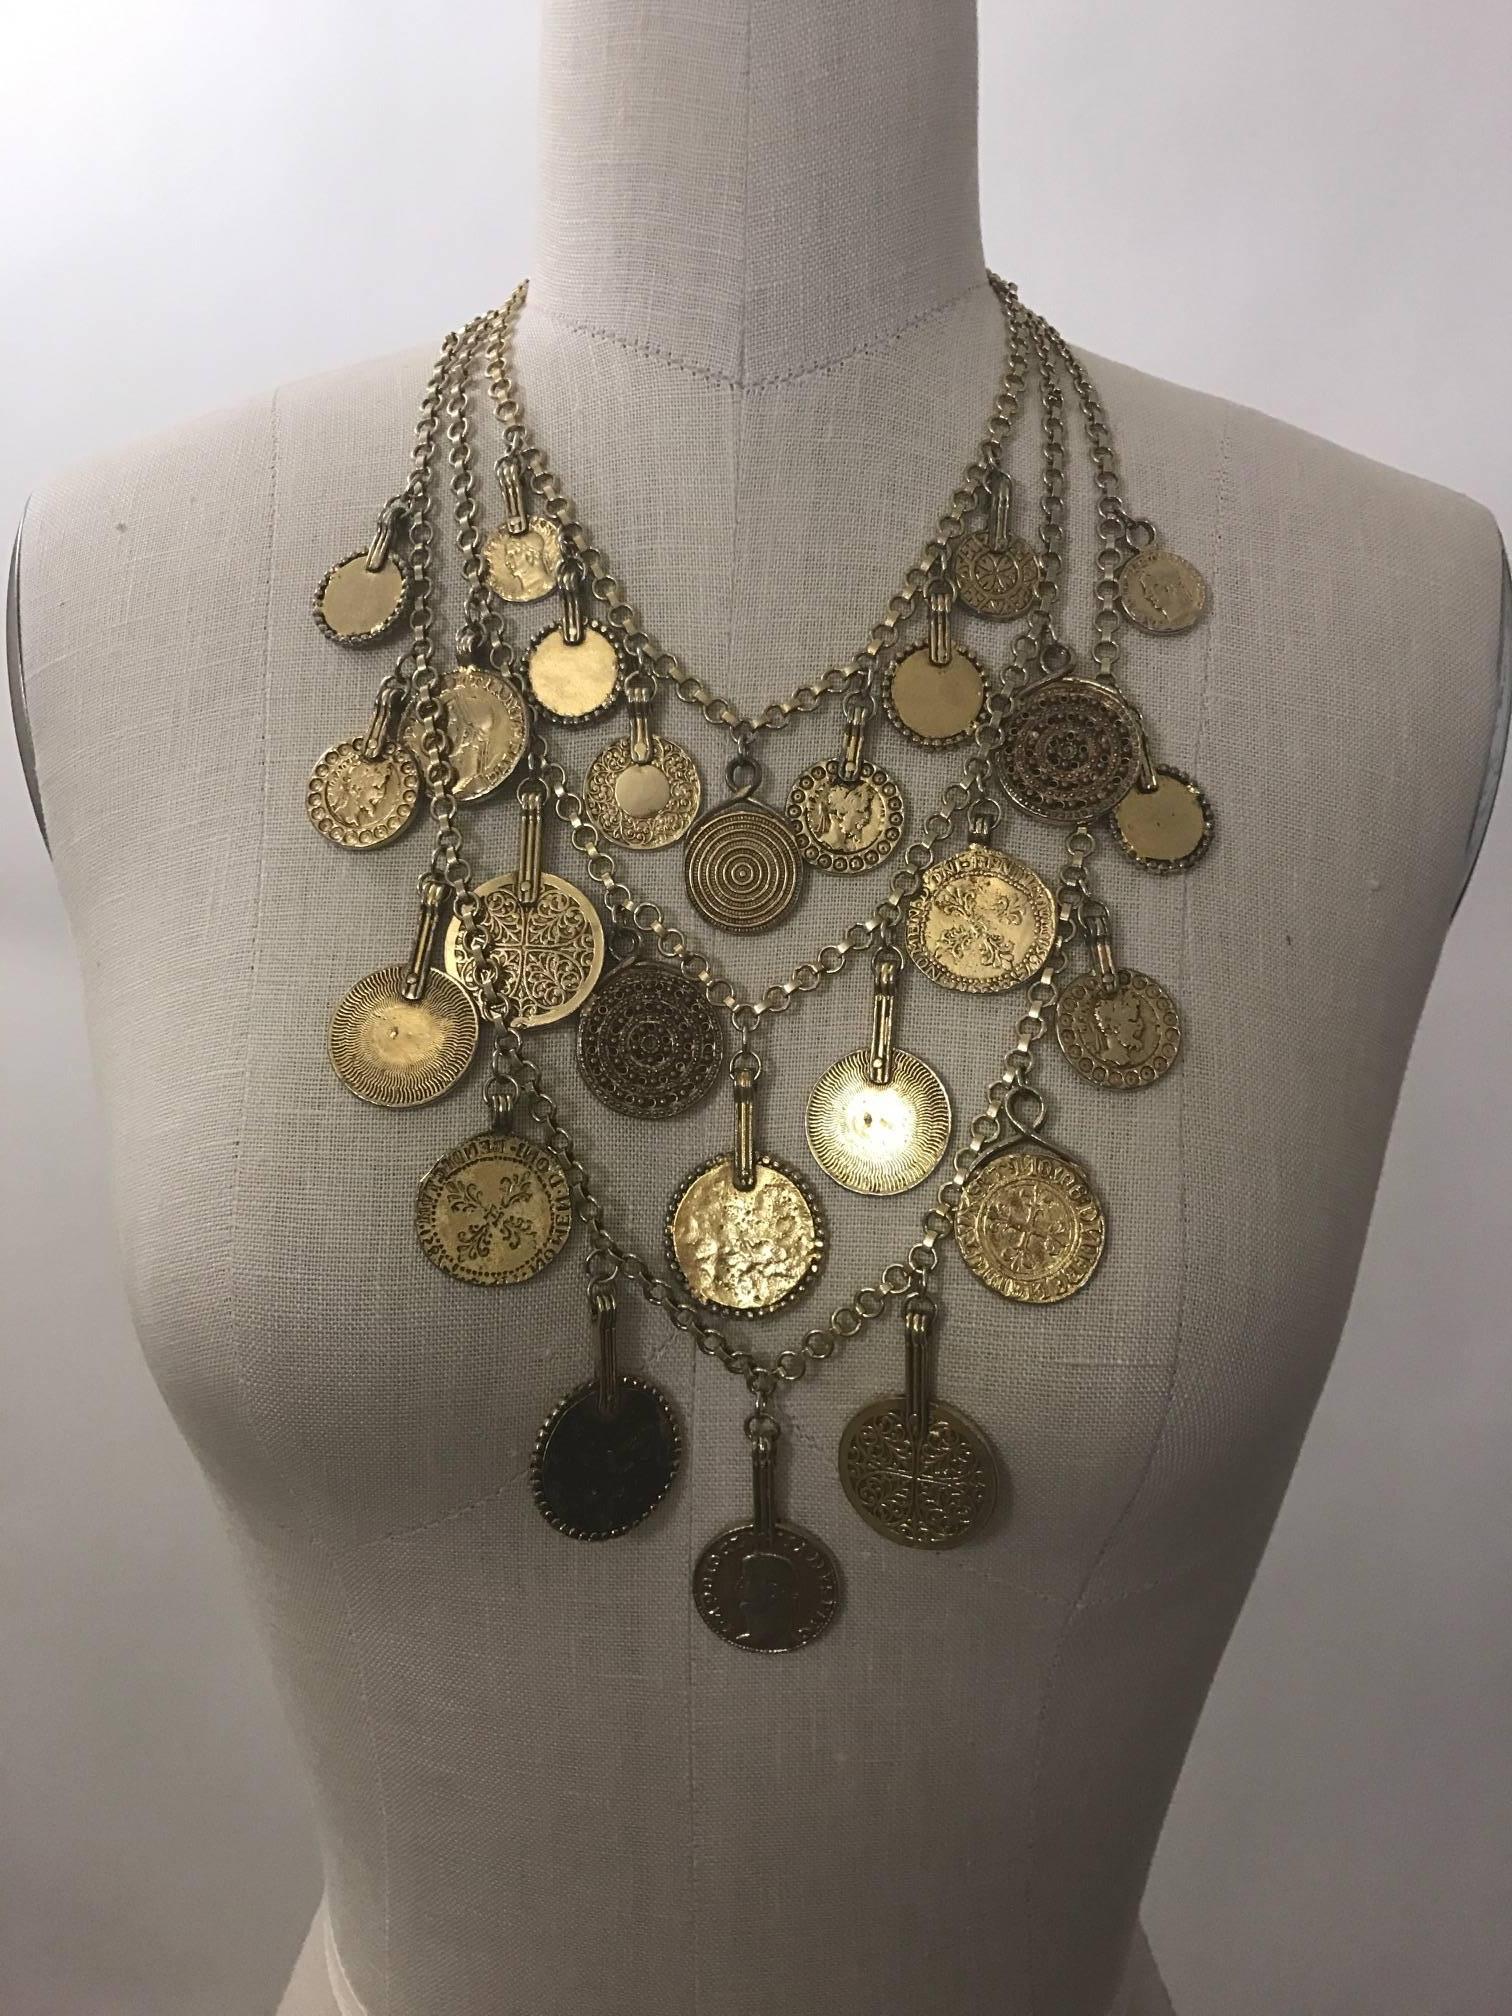 Vintage gold tone tone Yves Saint Laurent triple-strand medallion charm necklace from his 1977 gypsy themed collection. Signed YSL at S hook closure and hang tag.  

Seen on Farrah Fawcett in Vogue.   

Very good condition, some light wear to finish